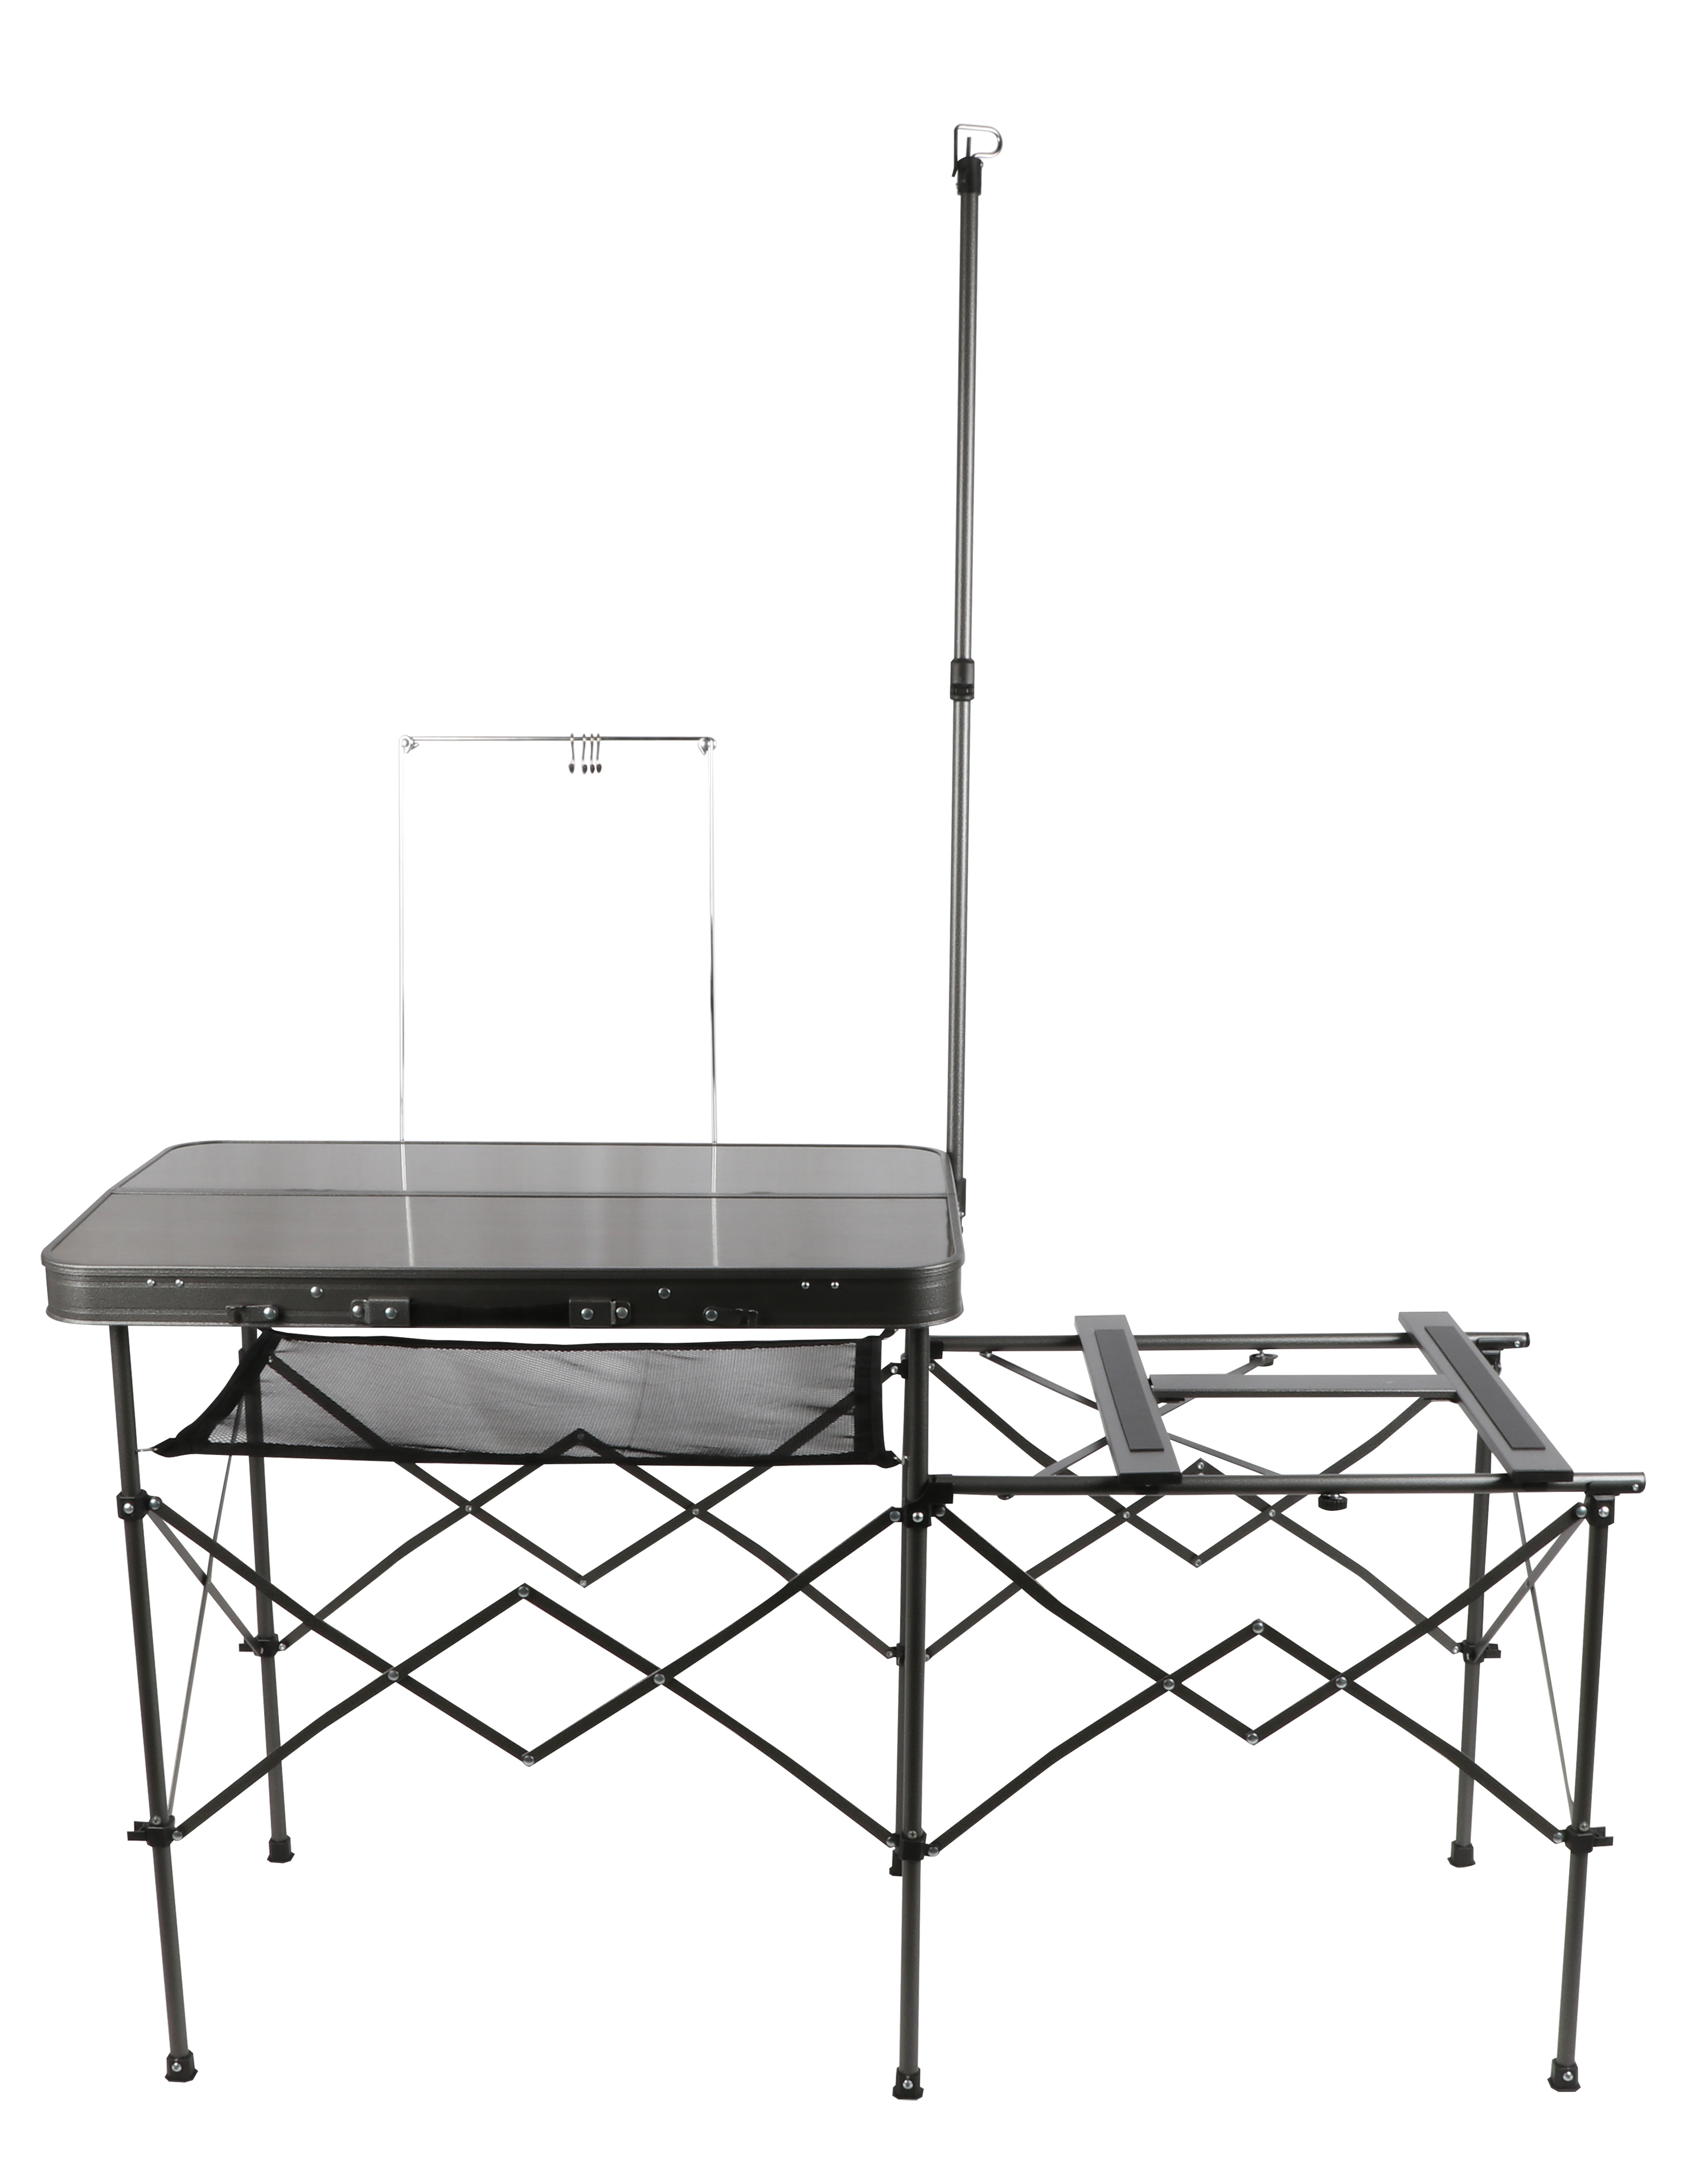 Ozark Trail Camping Table, Silver, 56"L x 21"W x 72"H - image 2 of 16